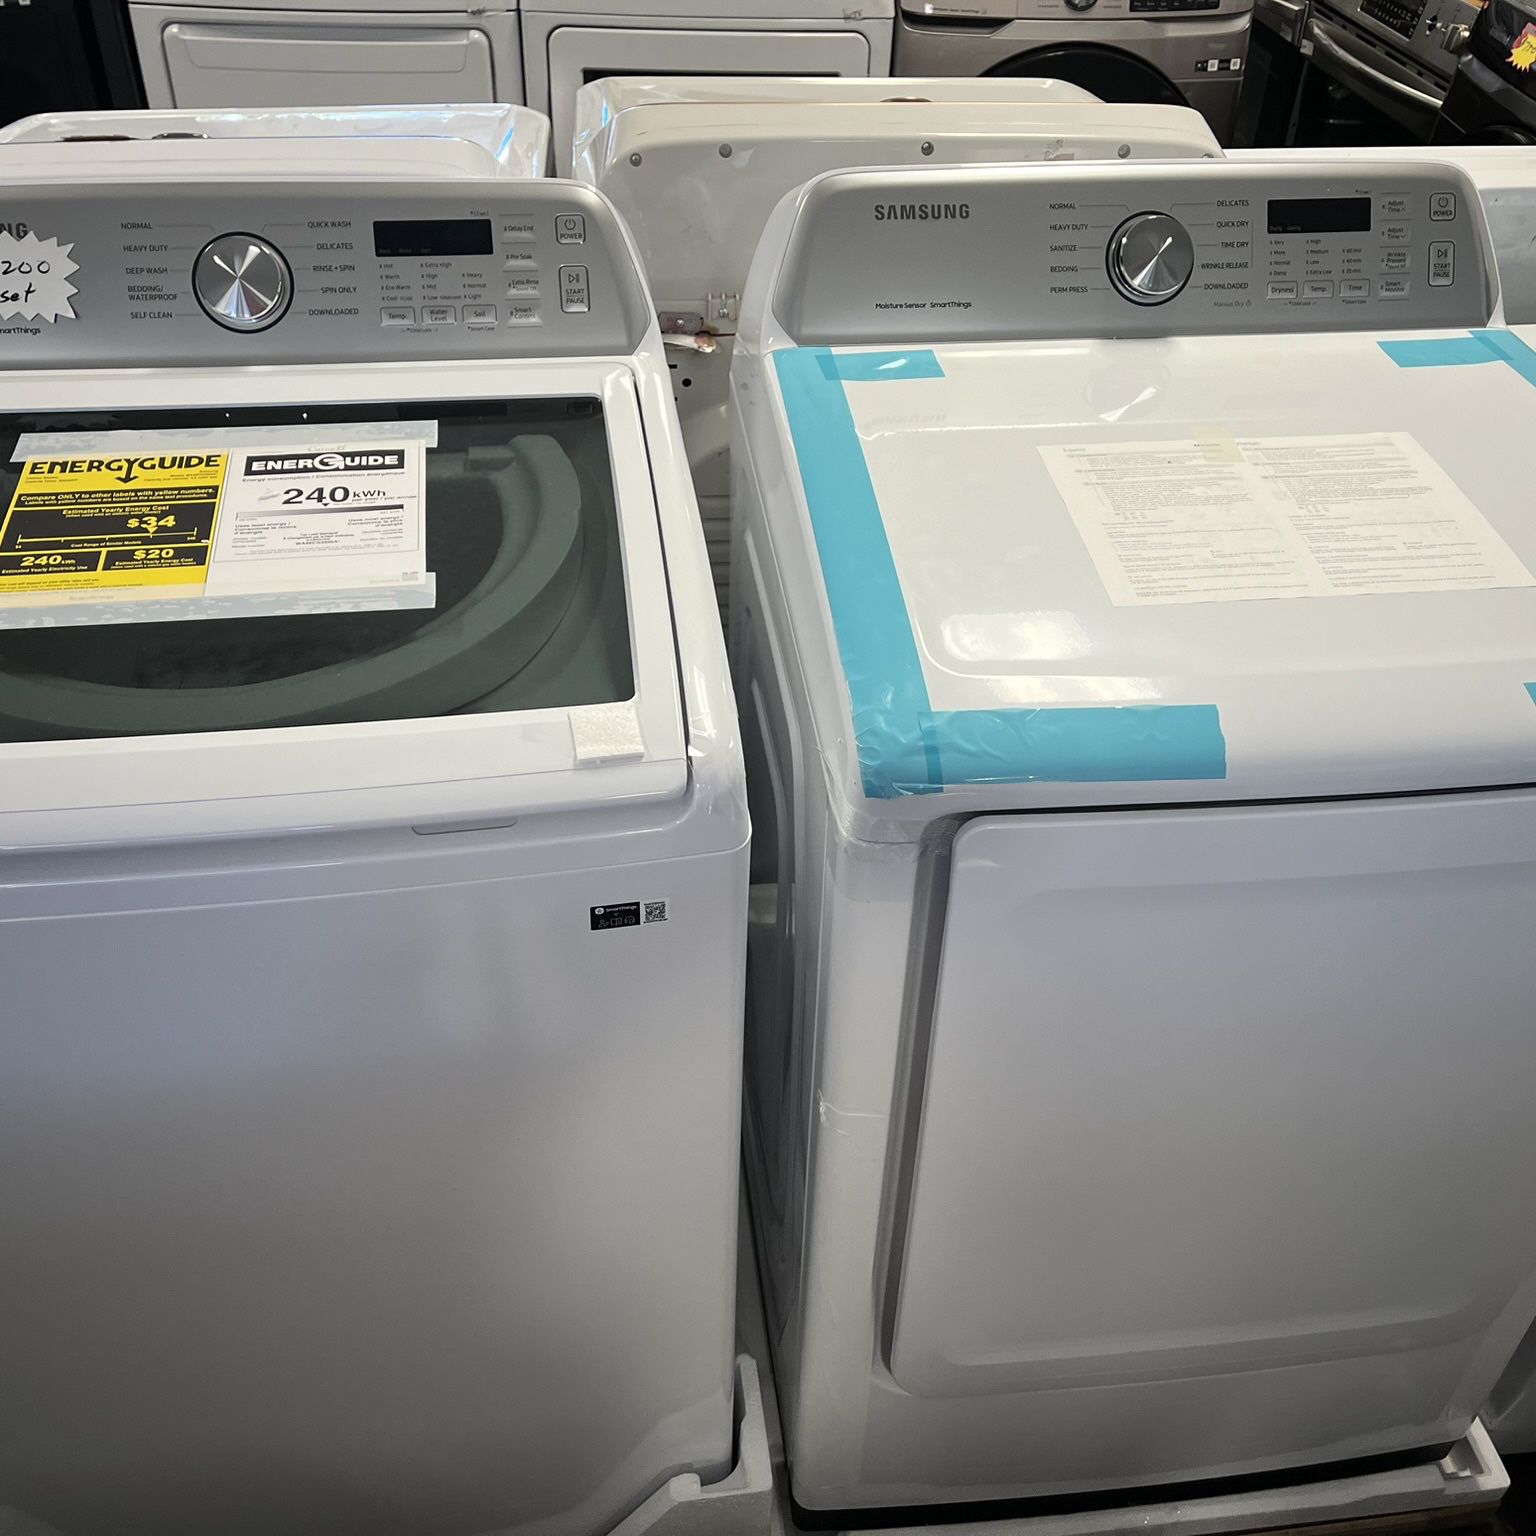 🚩🚩🚩 Sale!!! New Samsung Washer Dryer Set Top Loaders Washer With Agitator 🚩🚩